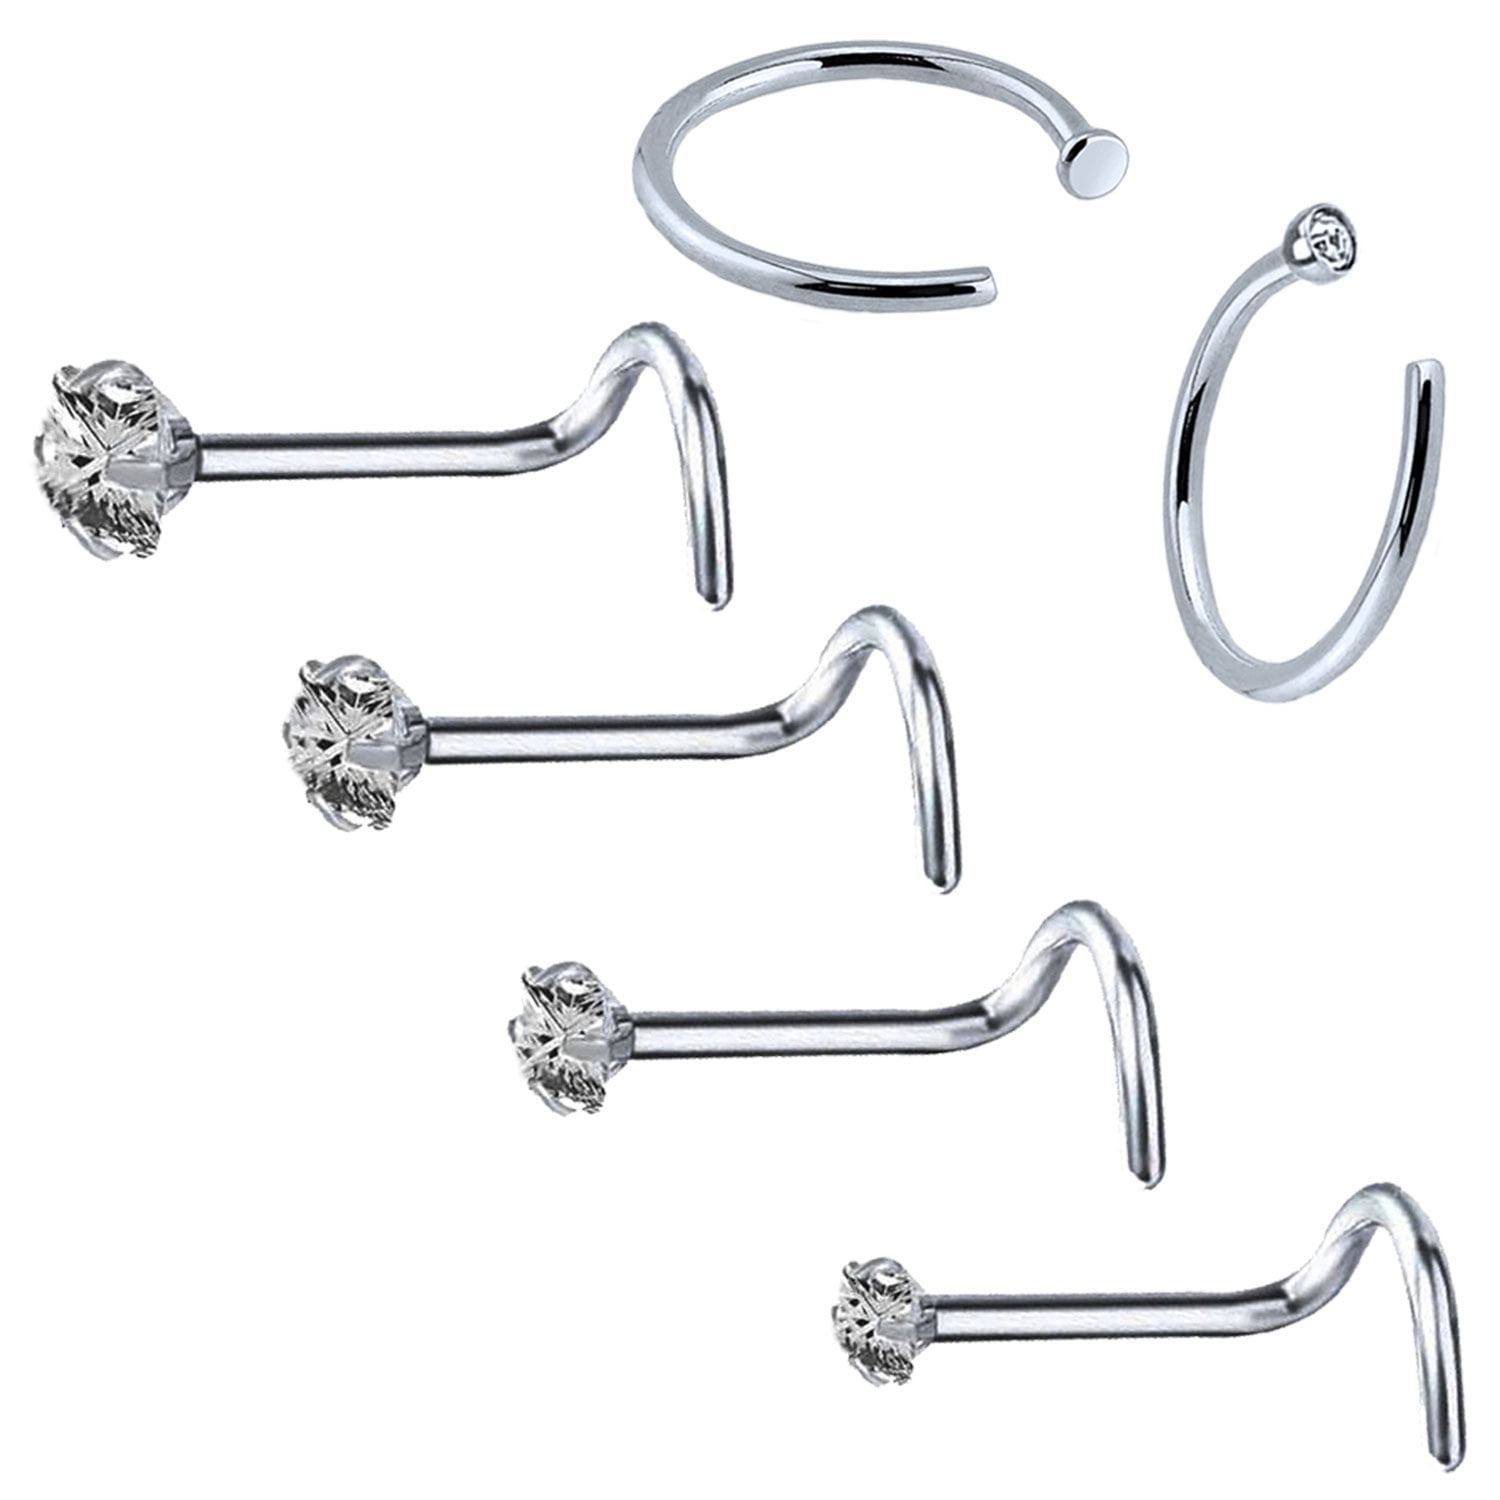 BodyJ4You 14PC Nose Screw Bone Studs Hoop Rings 20G Surgical Steel CZ Crystals Nostril Body Piercing 